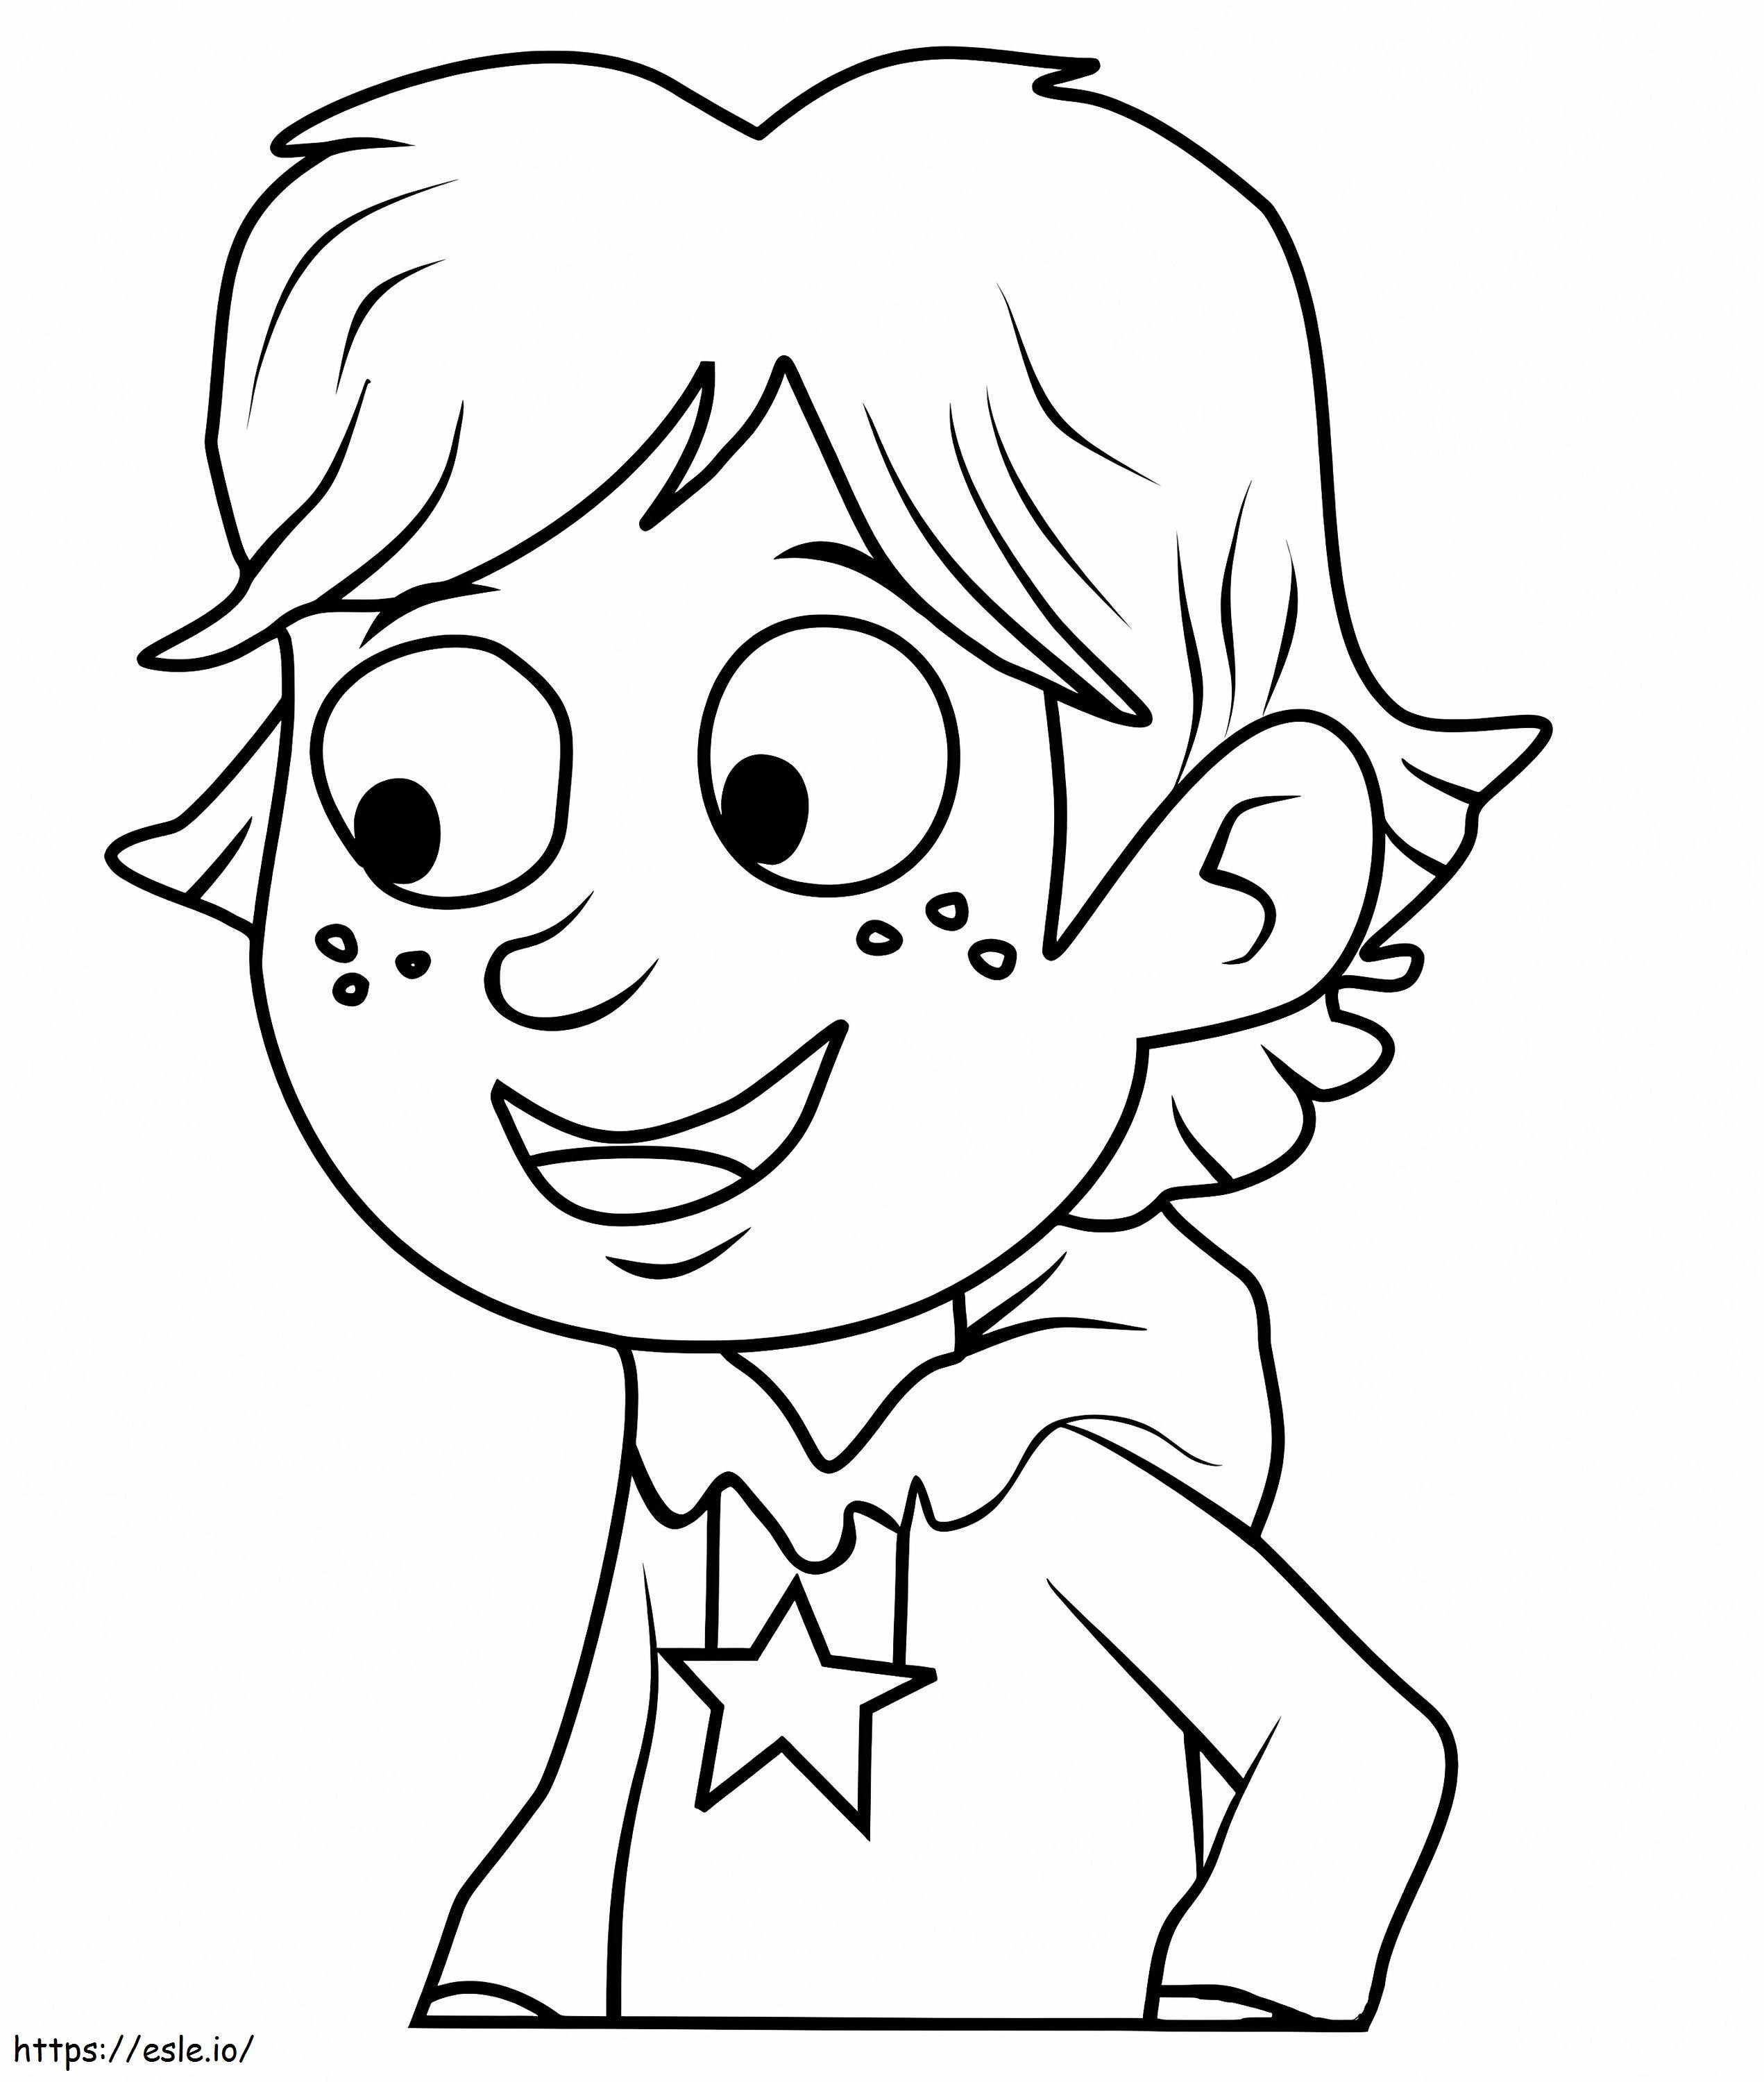 Tommy From Pound Puppies coloring page